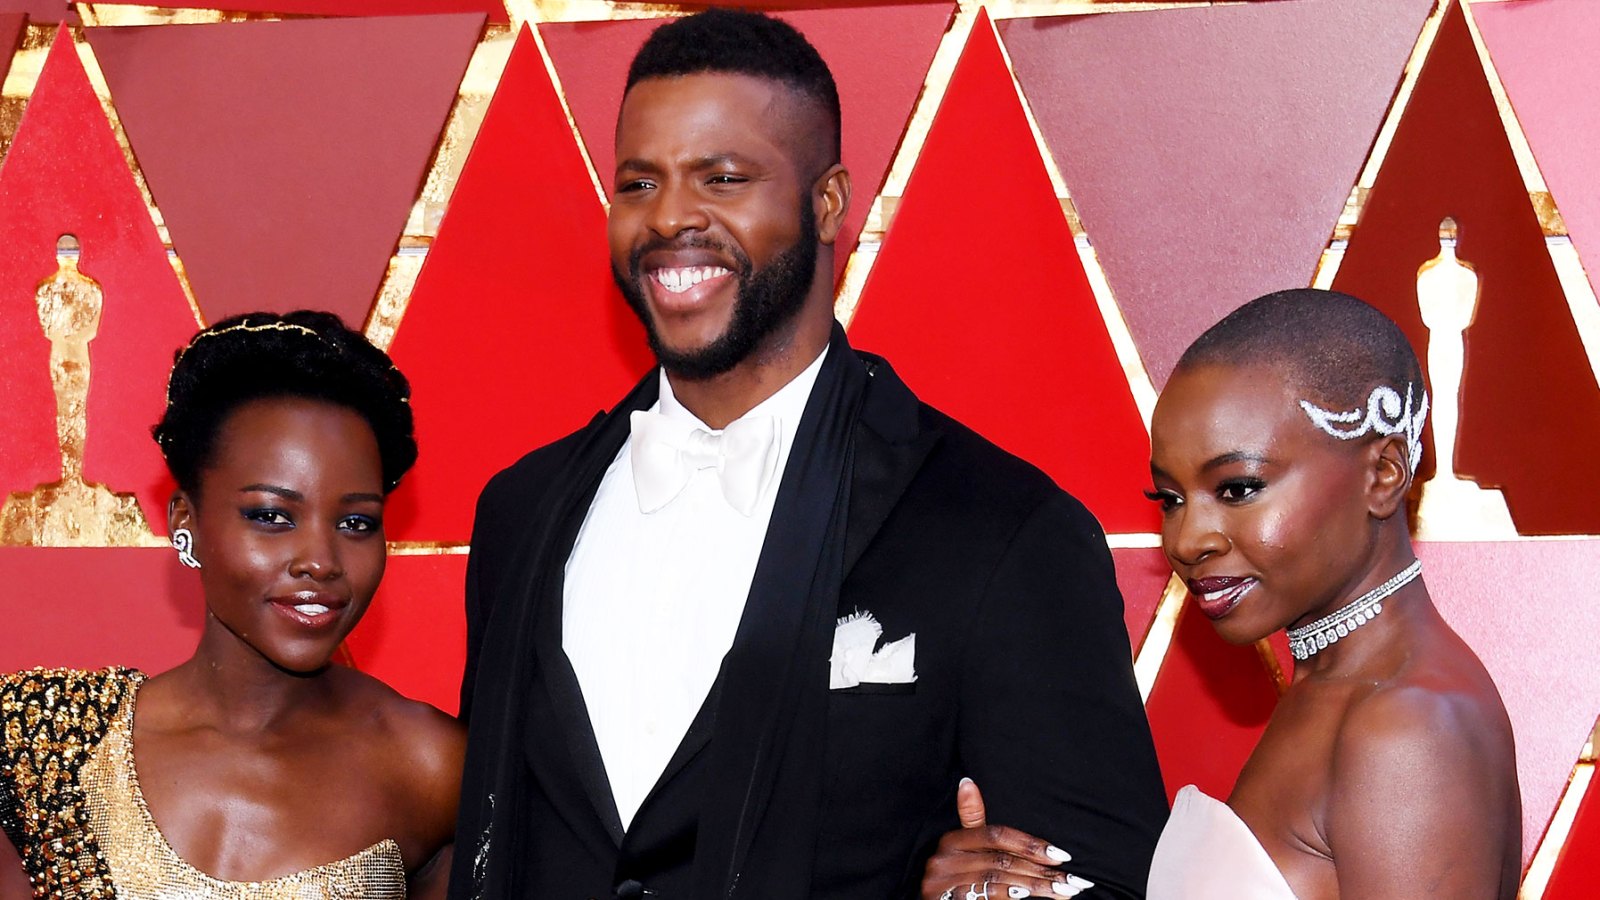 Lupita Nyong'o, Winston Duke, and Danai Gurira Lead Makeup Artist for the Academy Awards, Bruce Grayson, Shares His Number One Product and Other Behind-the-Scenes Se